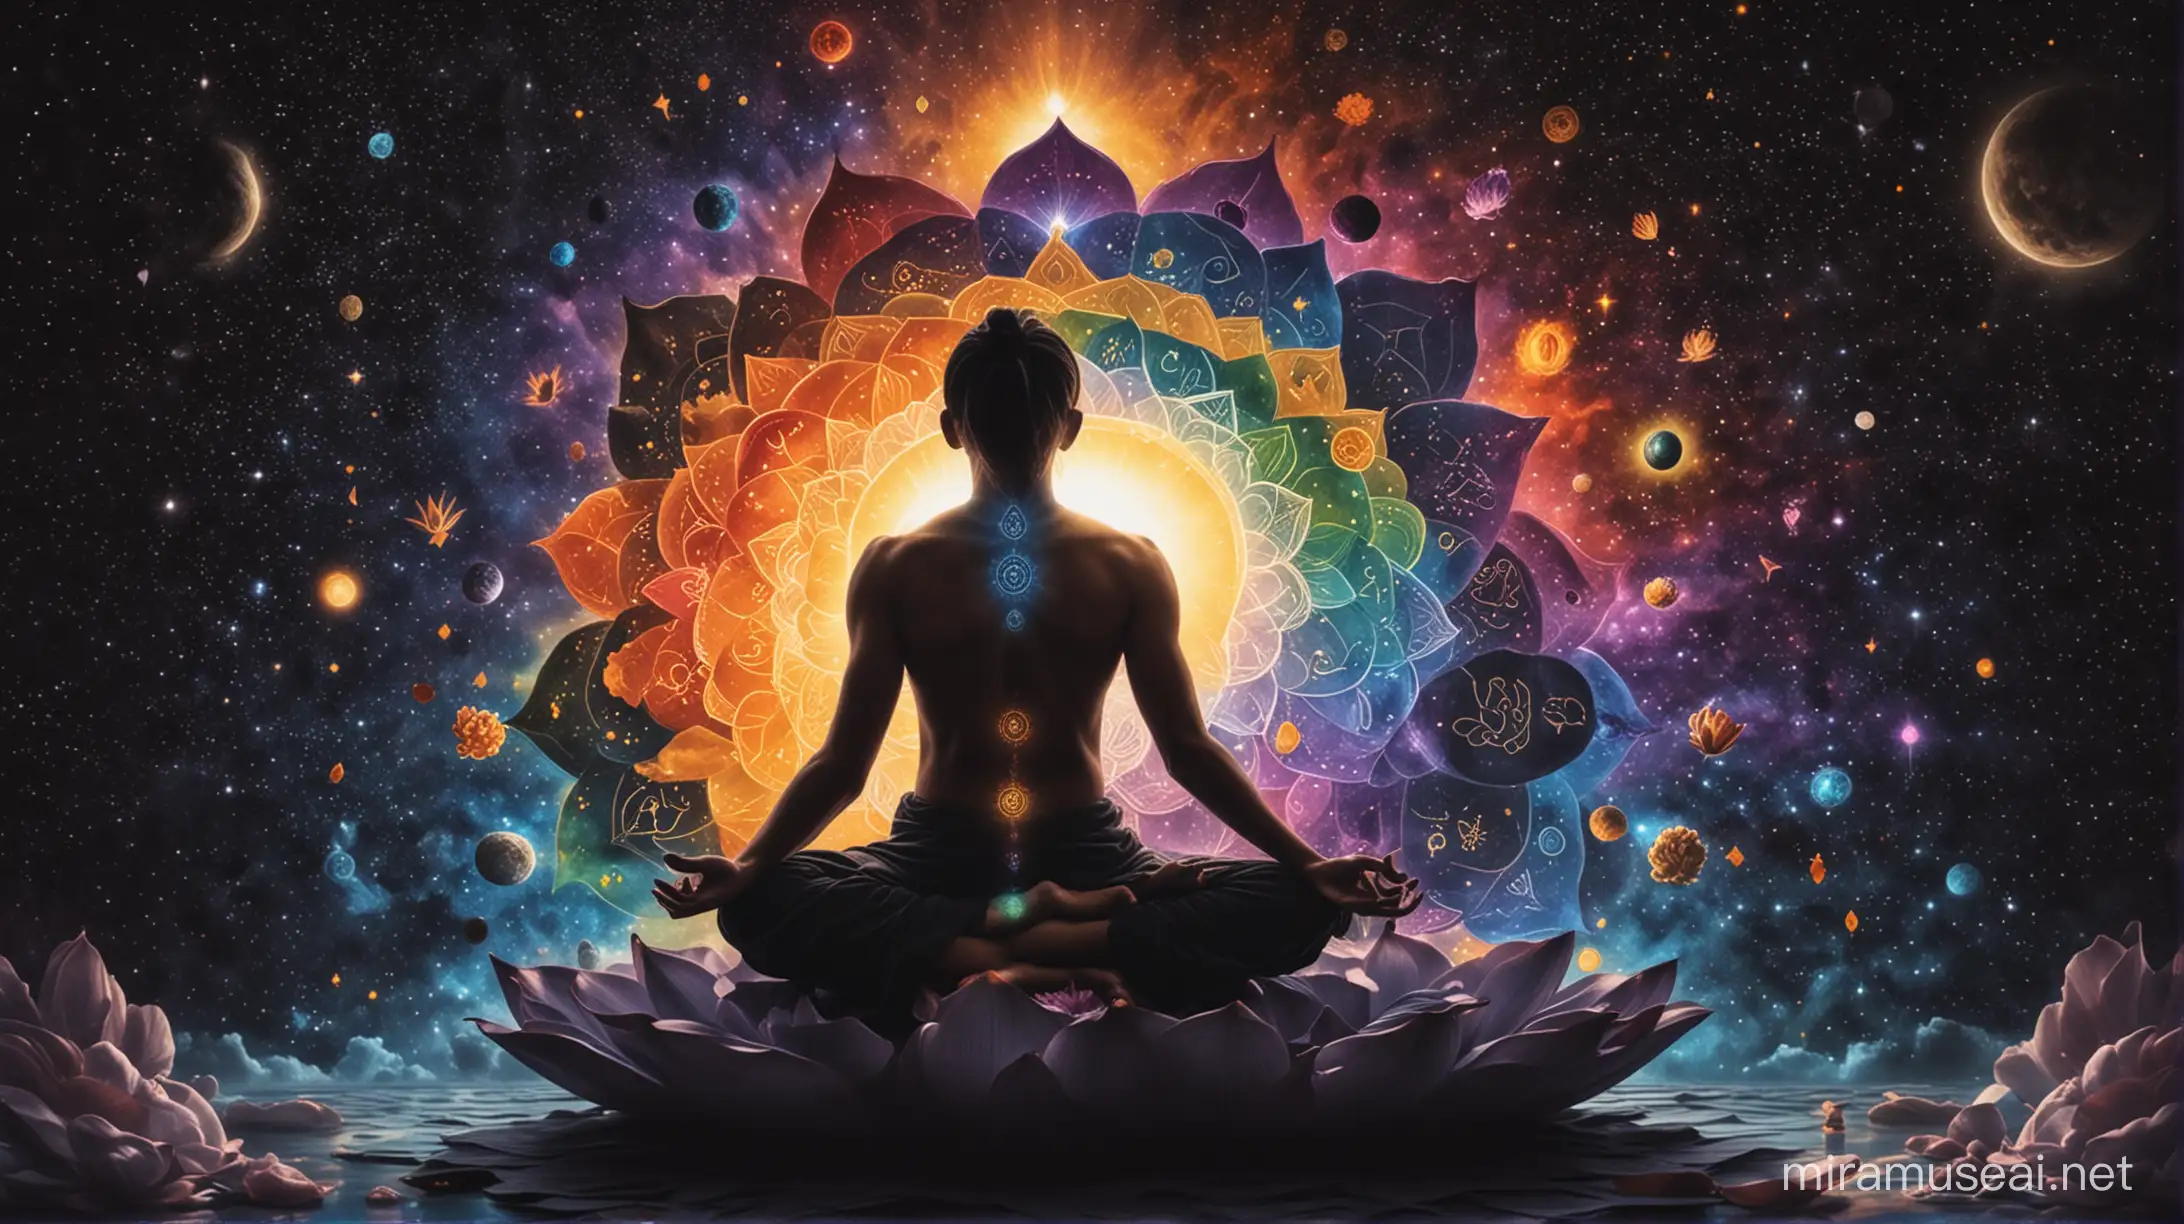 Meditating Person Surrounded by 7 Chakra Signs on Lotus Flower with Cosmic Background